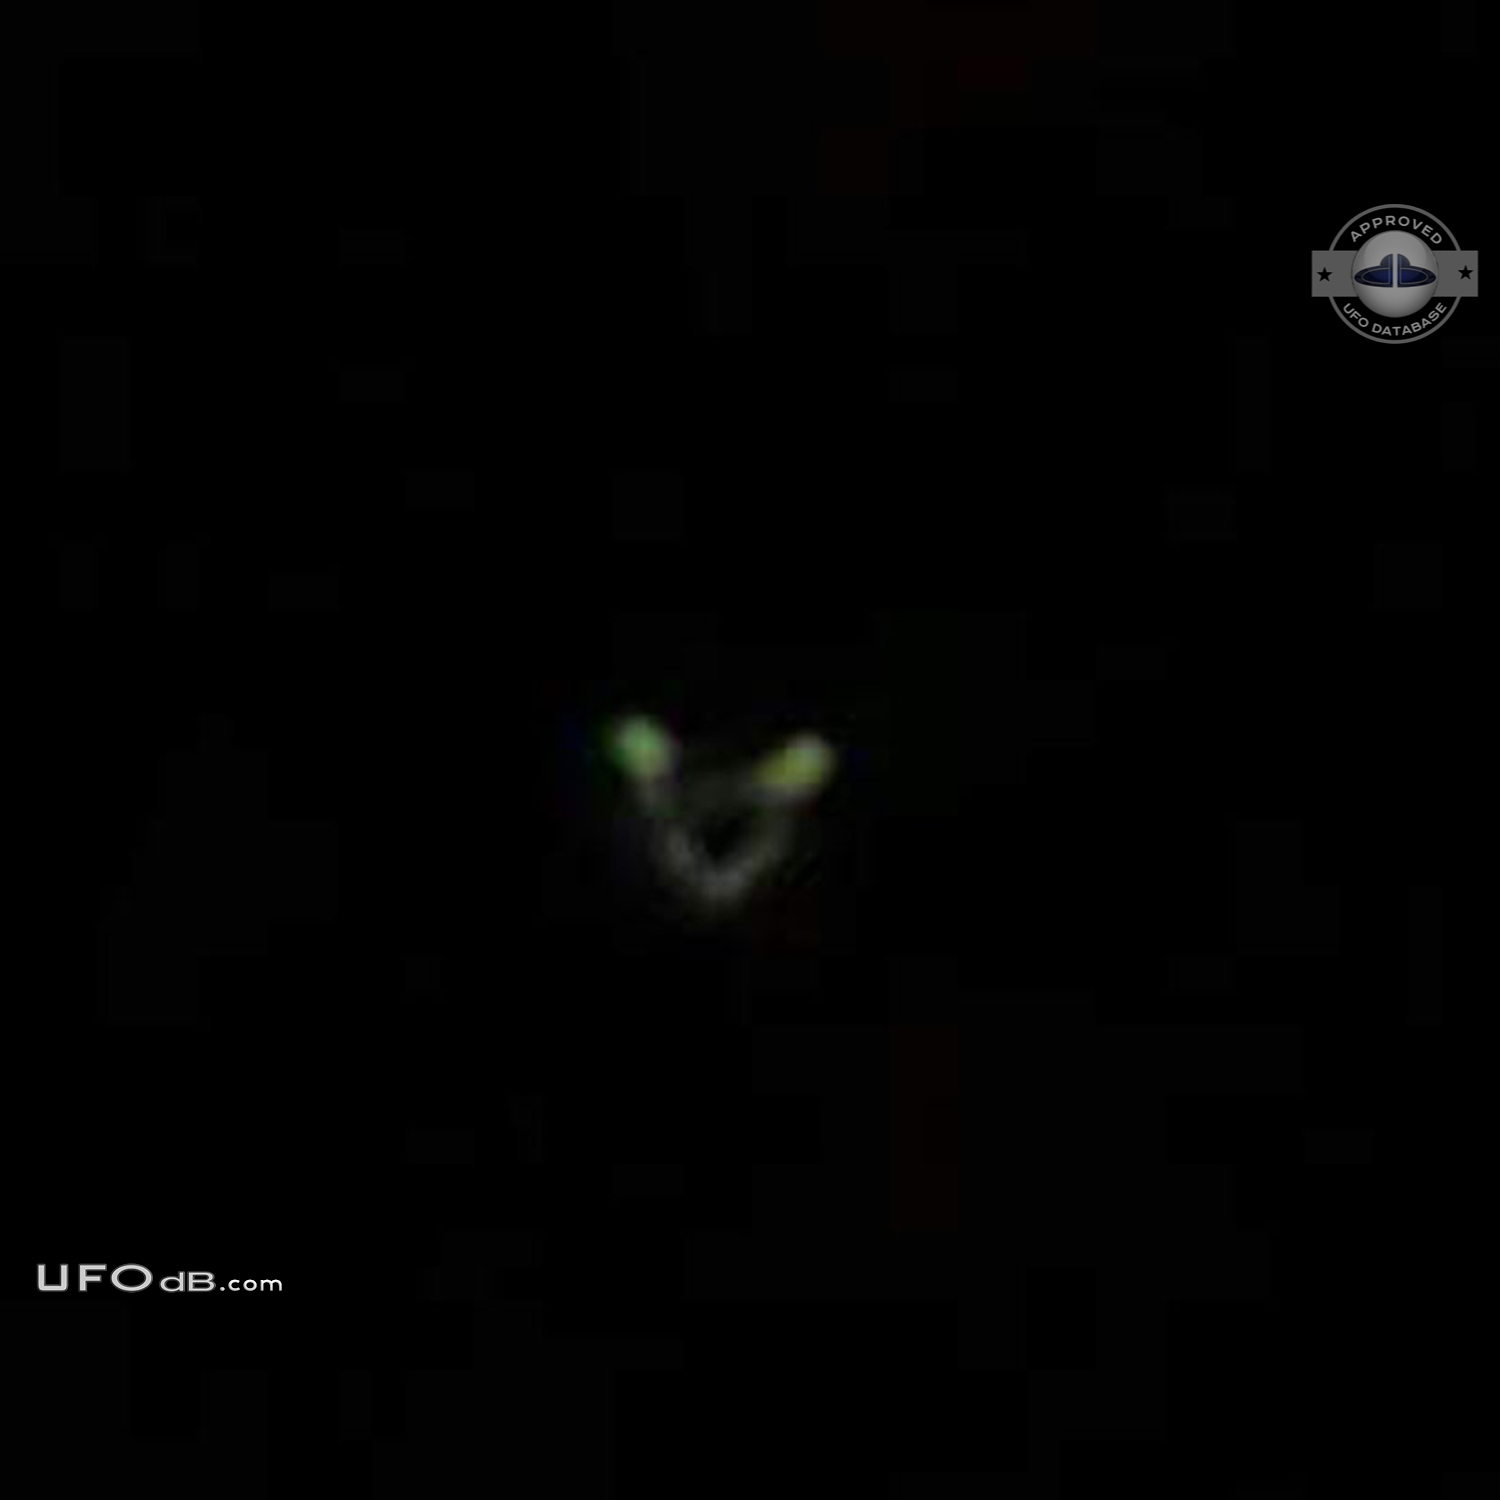 Silent UFO seen near woodland area Huddersfield UK on May 2011 UFO Picture #641-2